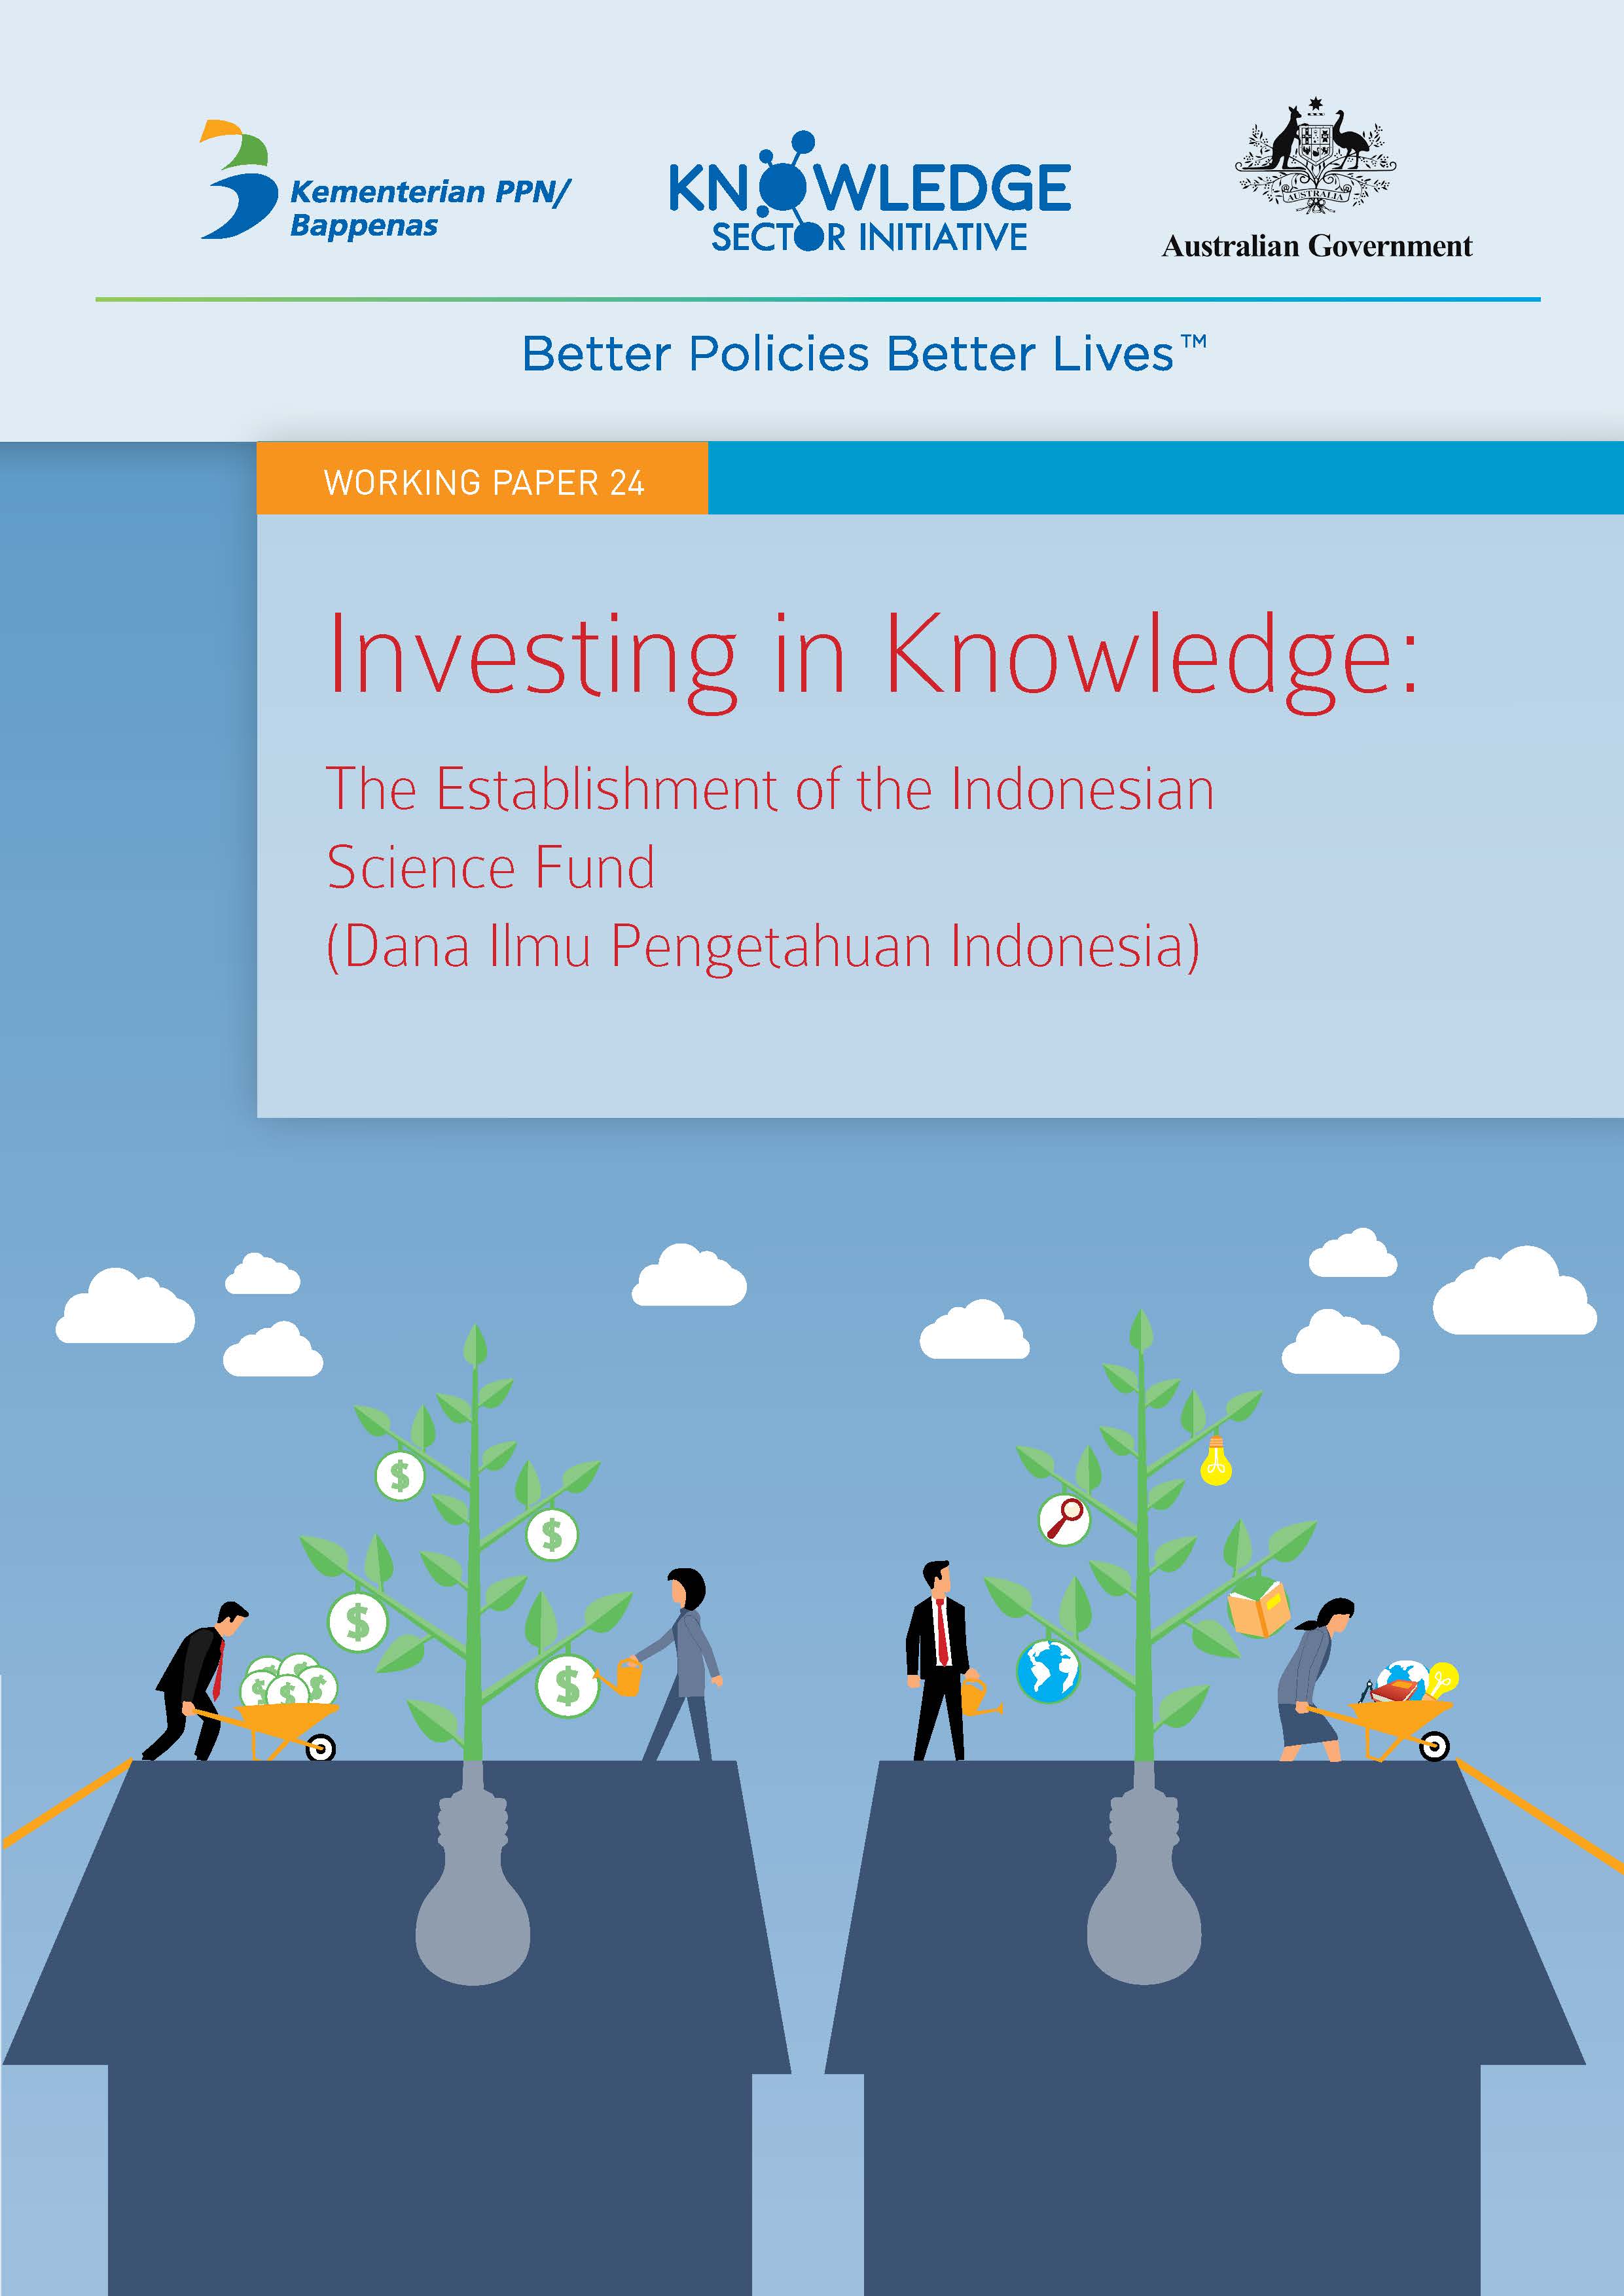 Working Paper -</br>Investing in Knowledge: The Establishment of the Indonesian Science Fund